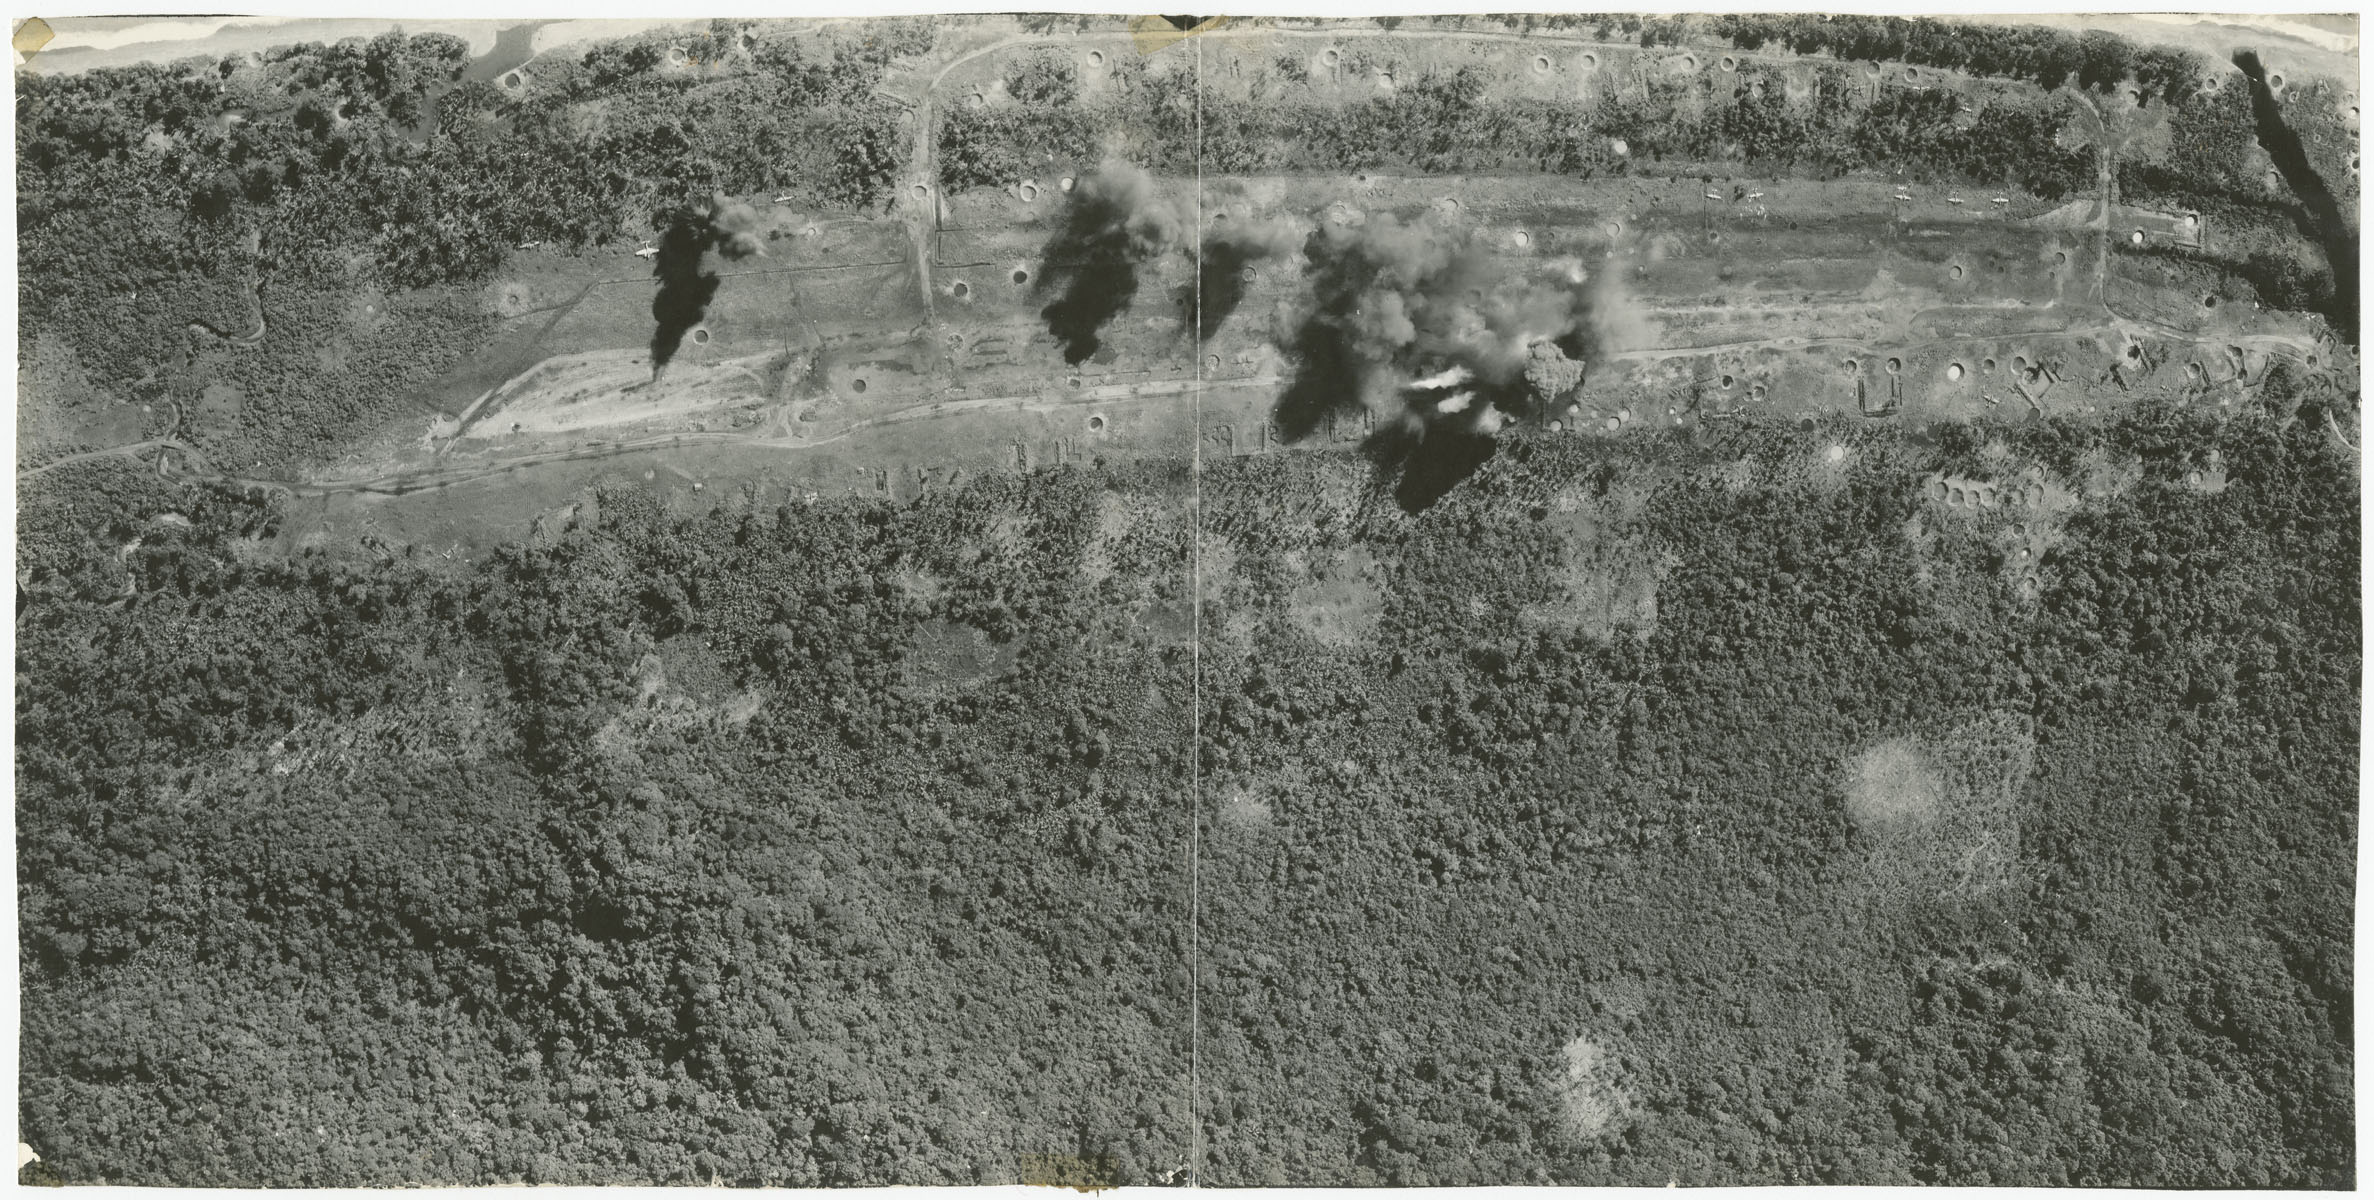 An aerial view of the bombing of the But Airdrome on the coast of New Guinea.